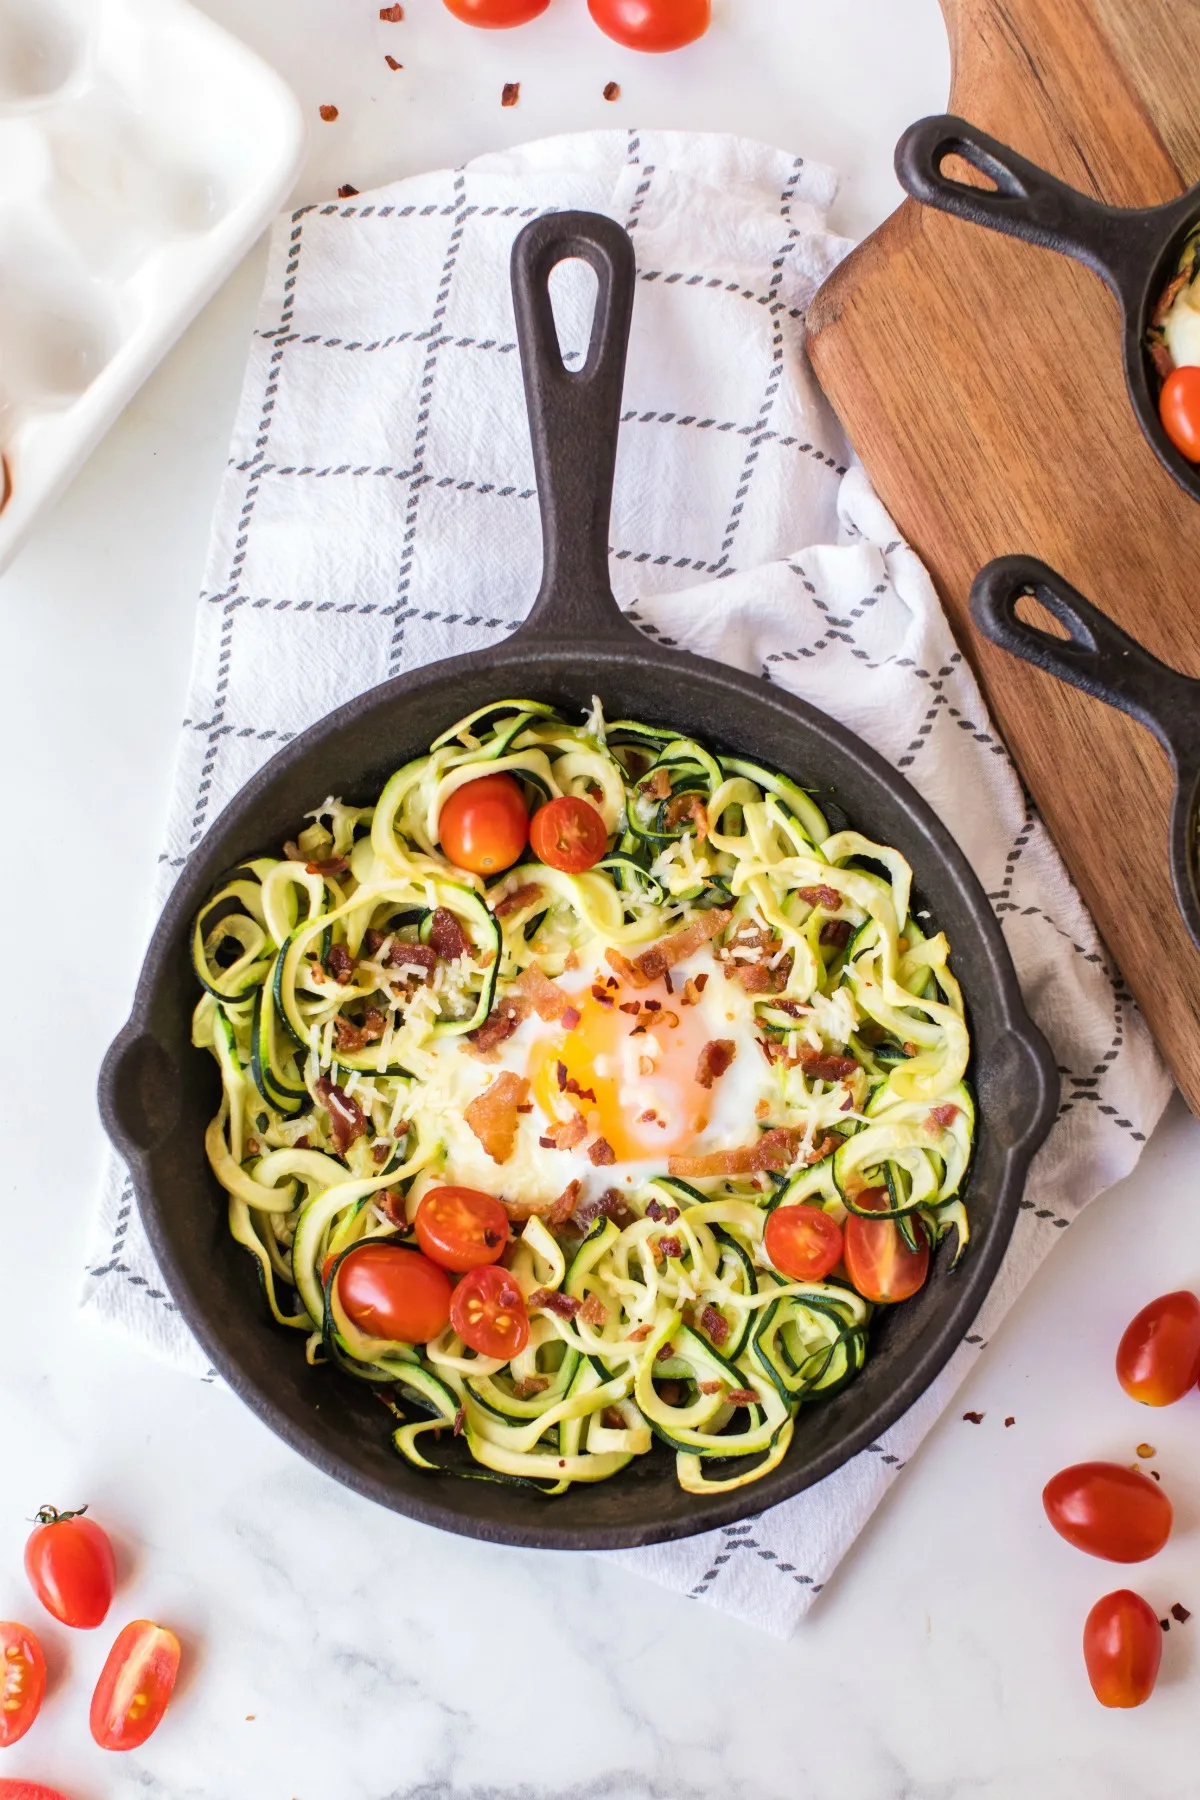 Zoodles with egg, bacon, tomato in a skillet.